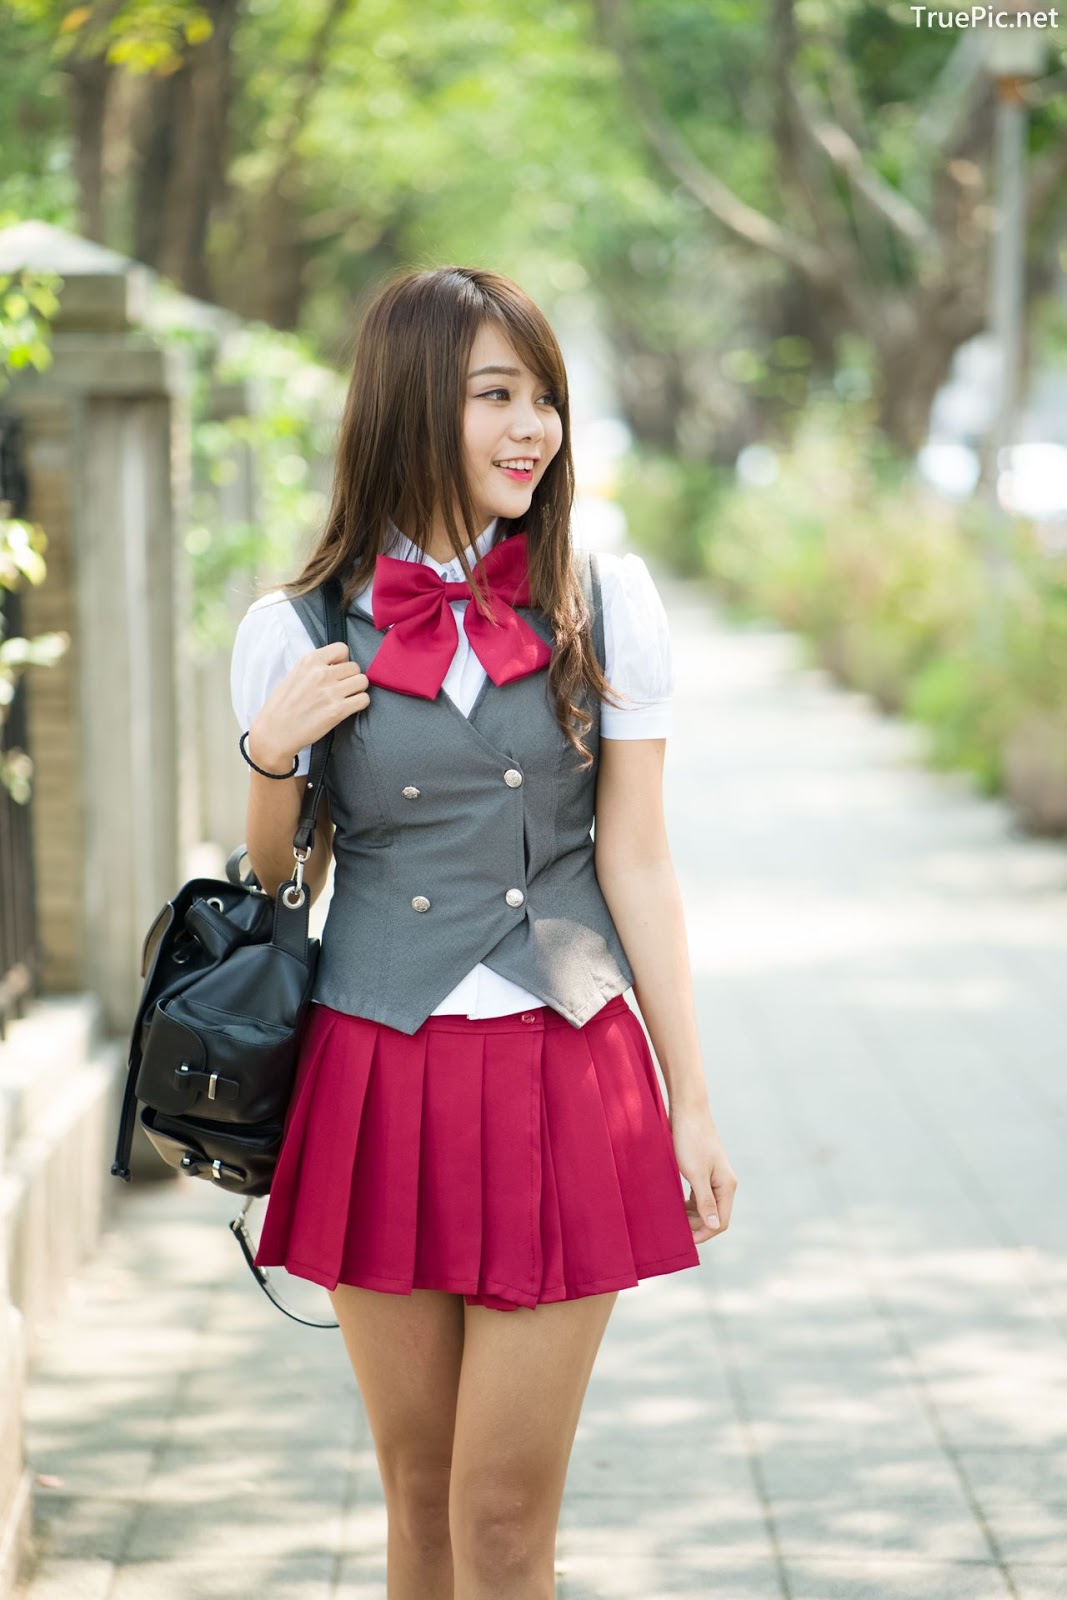 Image-Taiwan-Social-Celebrity-Sun-Hui-Tong-孫卉彤-A-Day-as-Student-Girl-TruePic.net- Picture-75